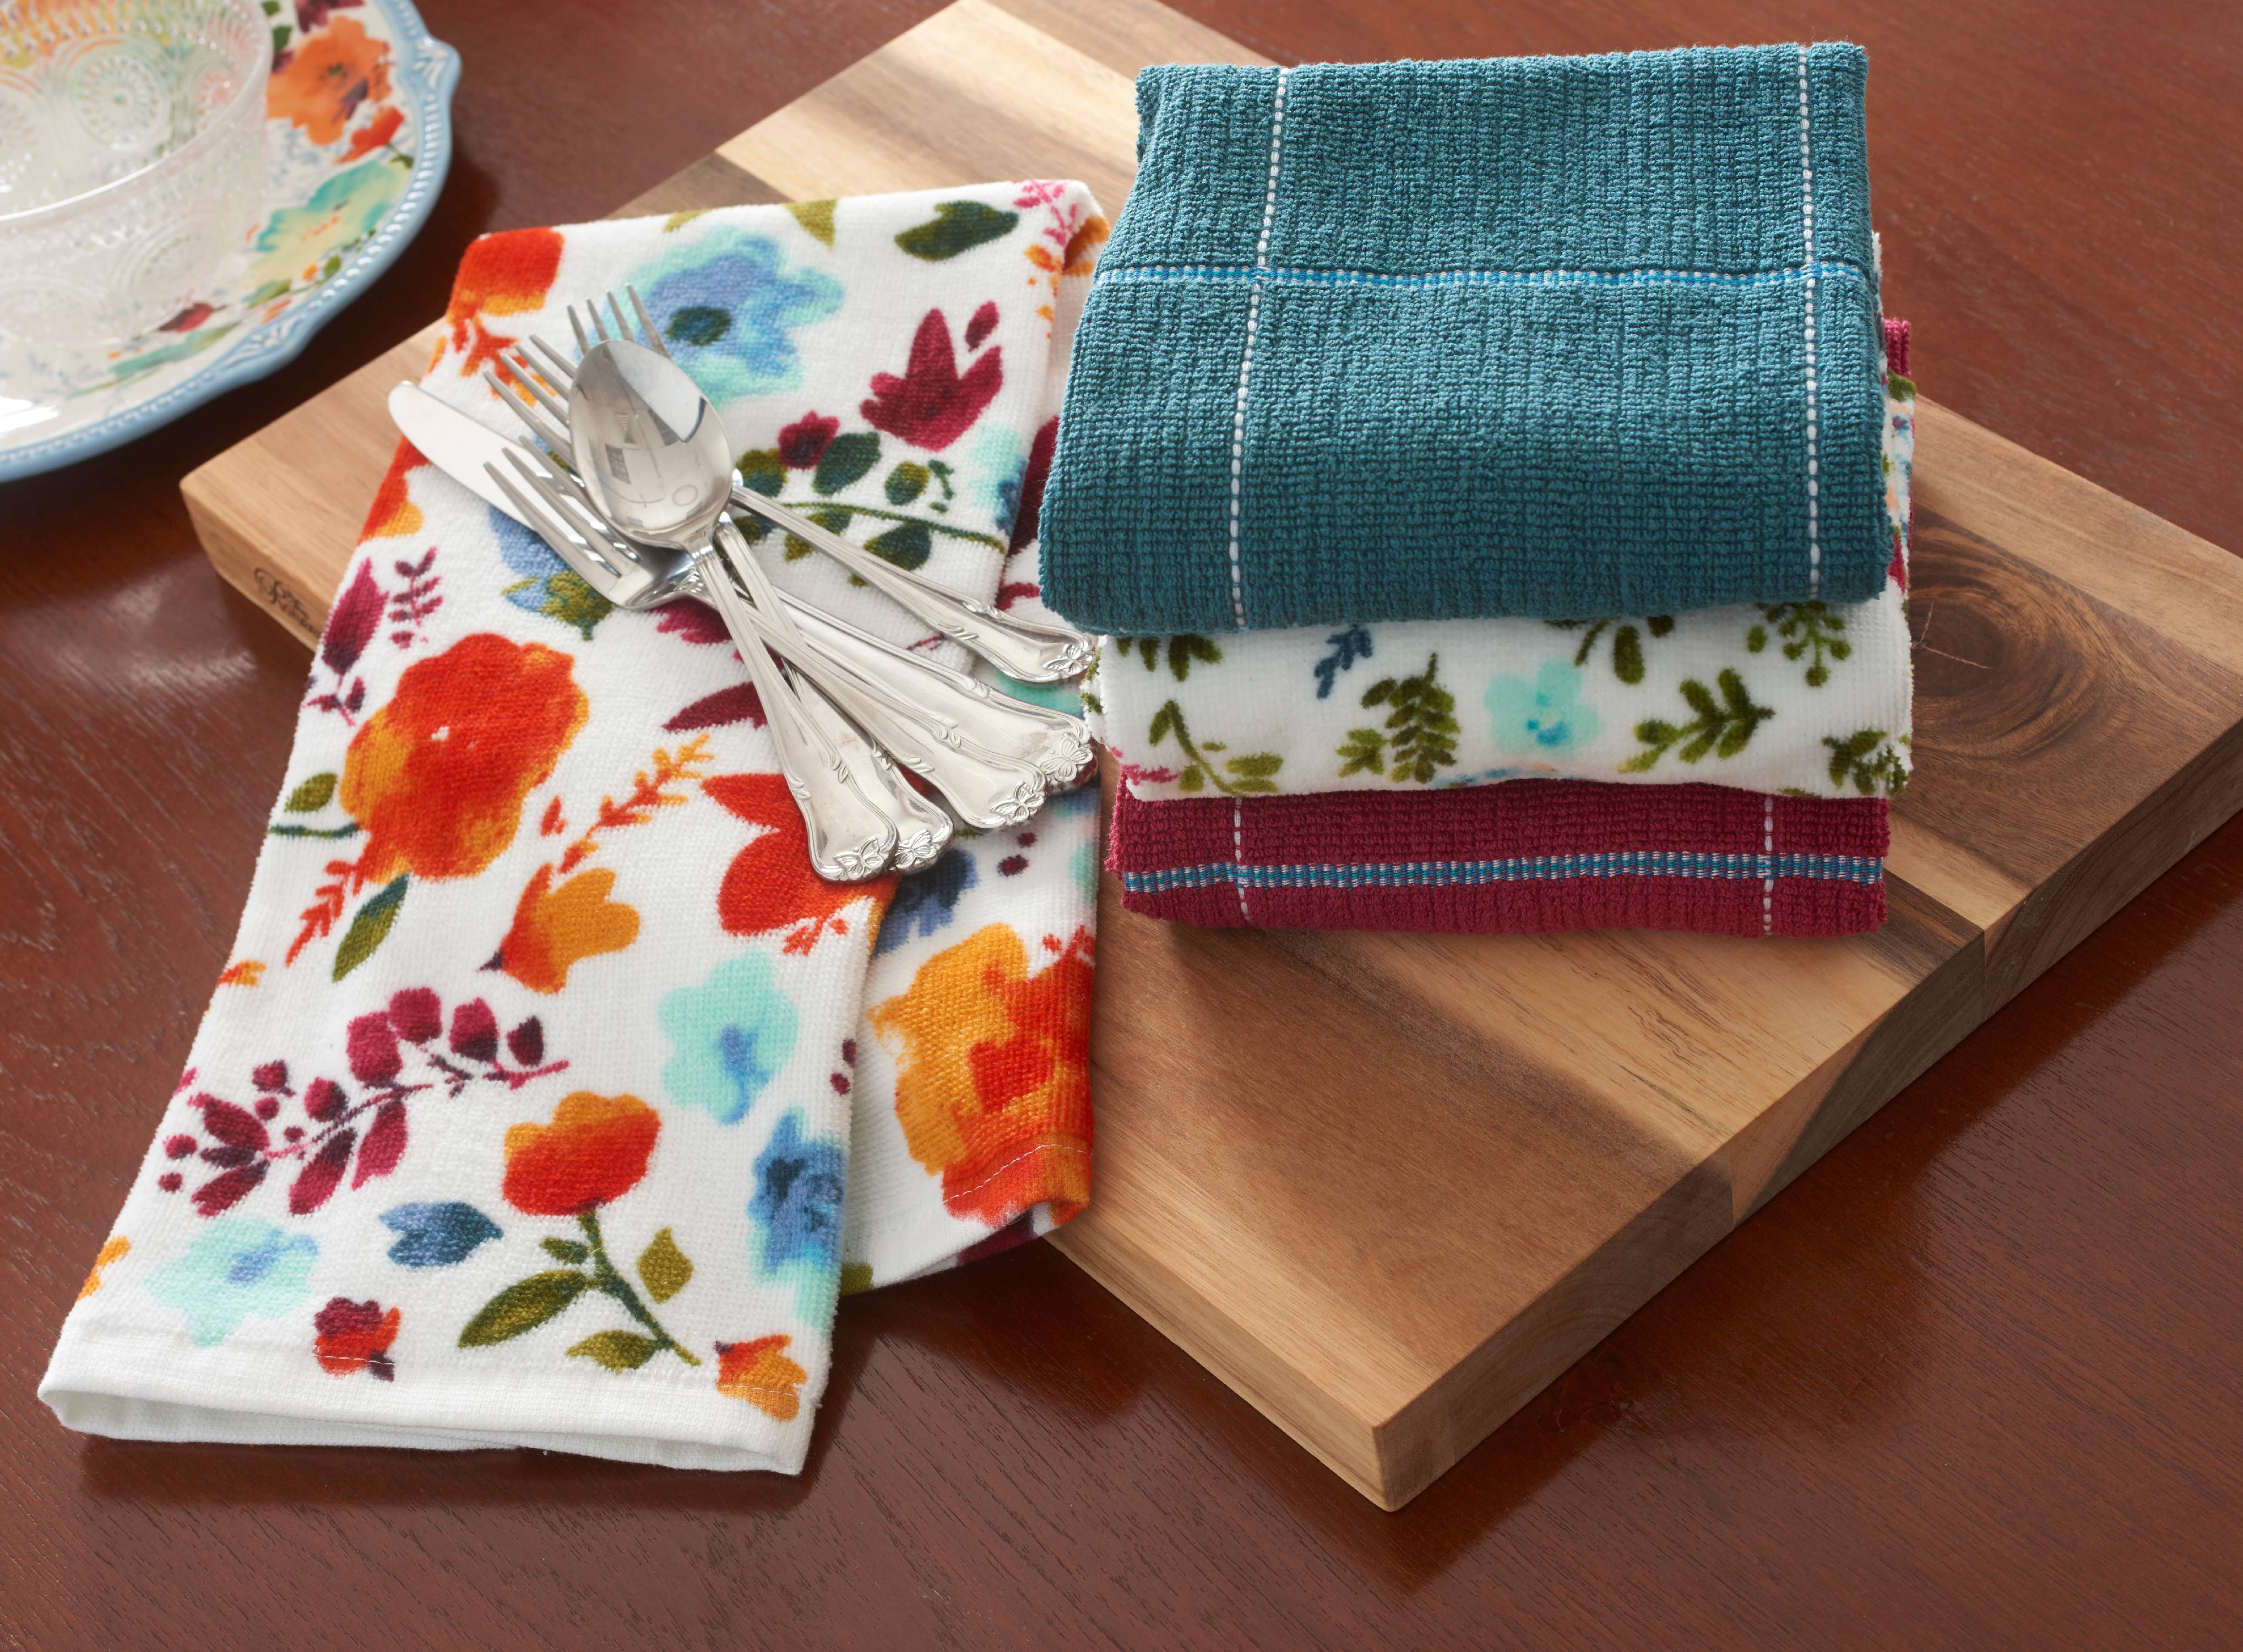 The Pioneer Woman Willow Kitchen Towel Set, Multicolor, 4 Piece - image 1 of 2